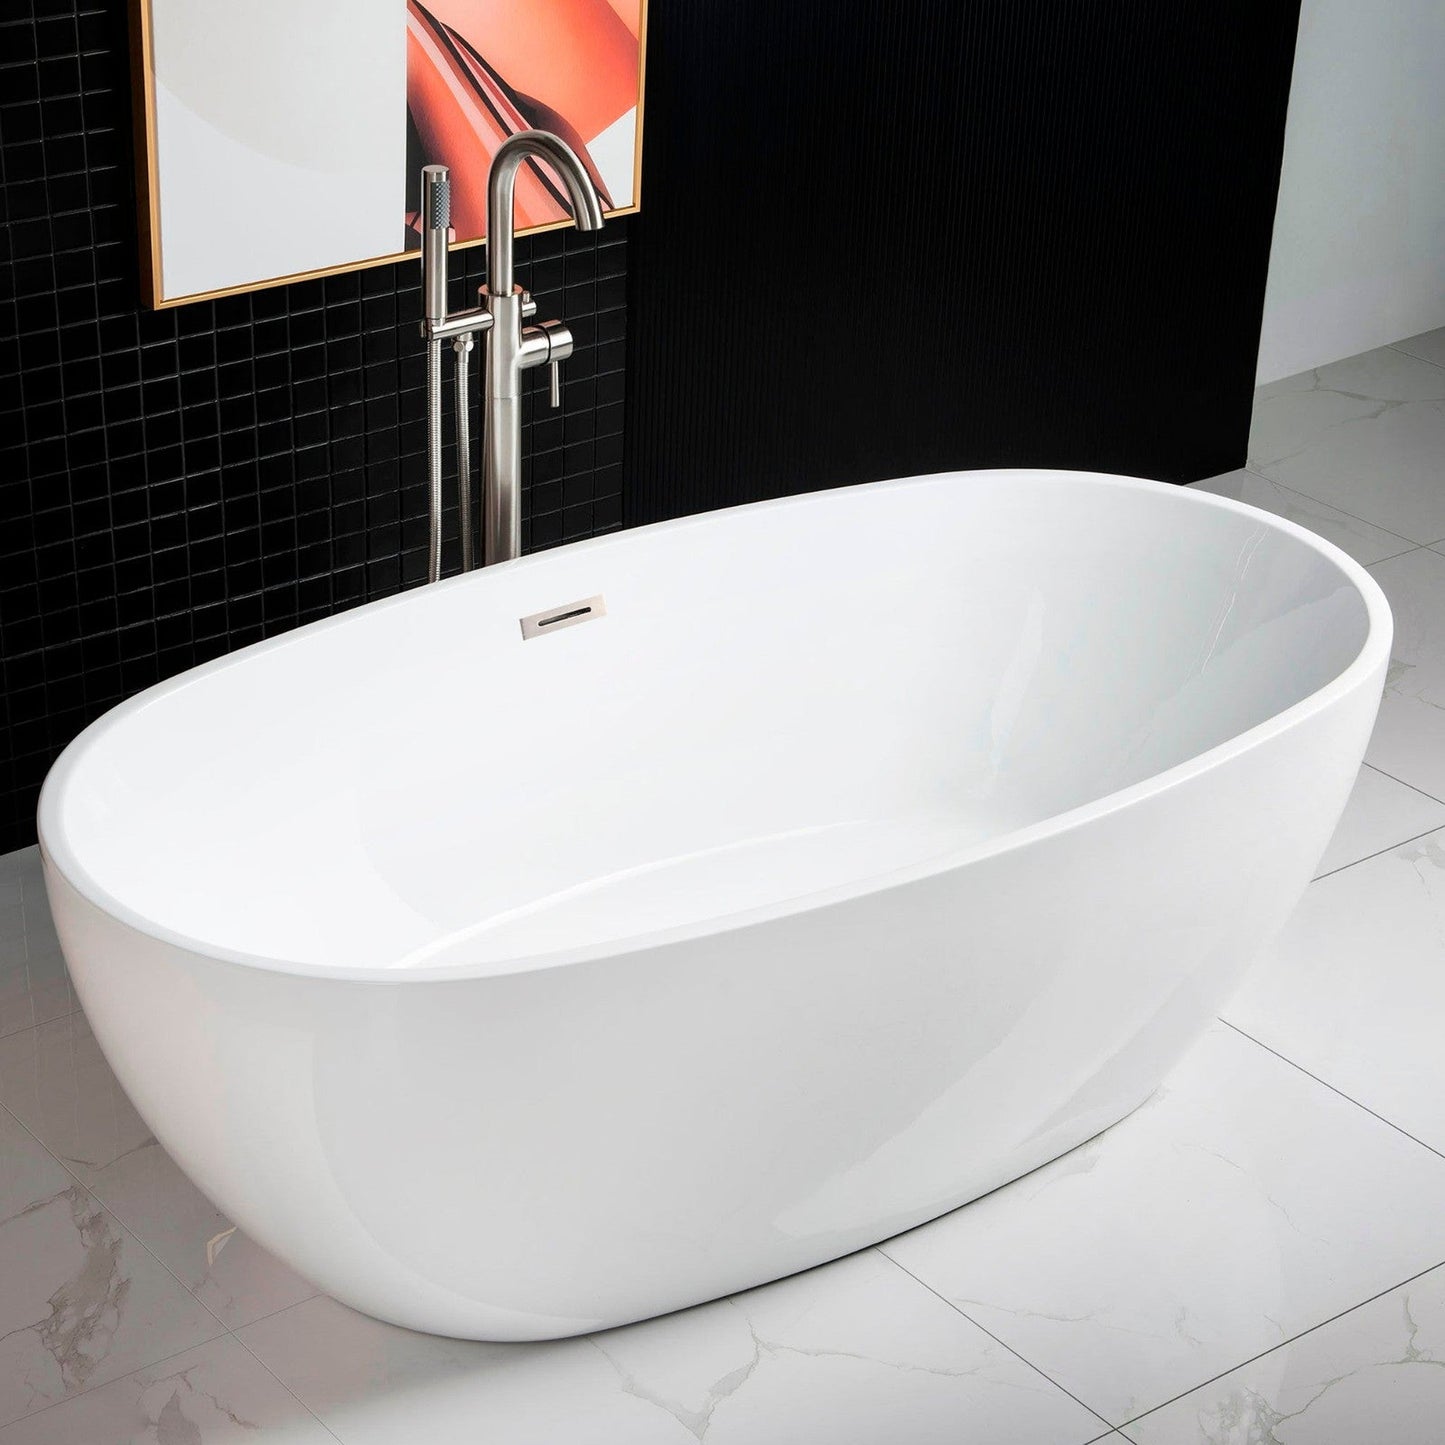 WoodBridge B0028 67" White Acrylic Freestanding Soaking Bathtub With Brushed Nickel Drain, Overflow, F0070BNVT Tub Filler and Caddy Tray